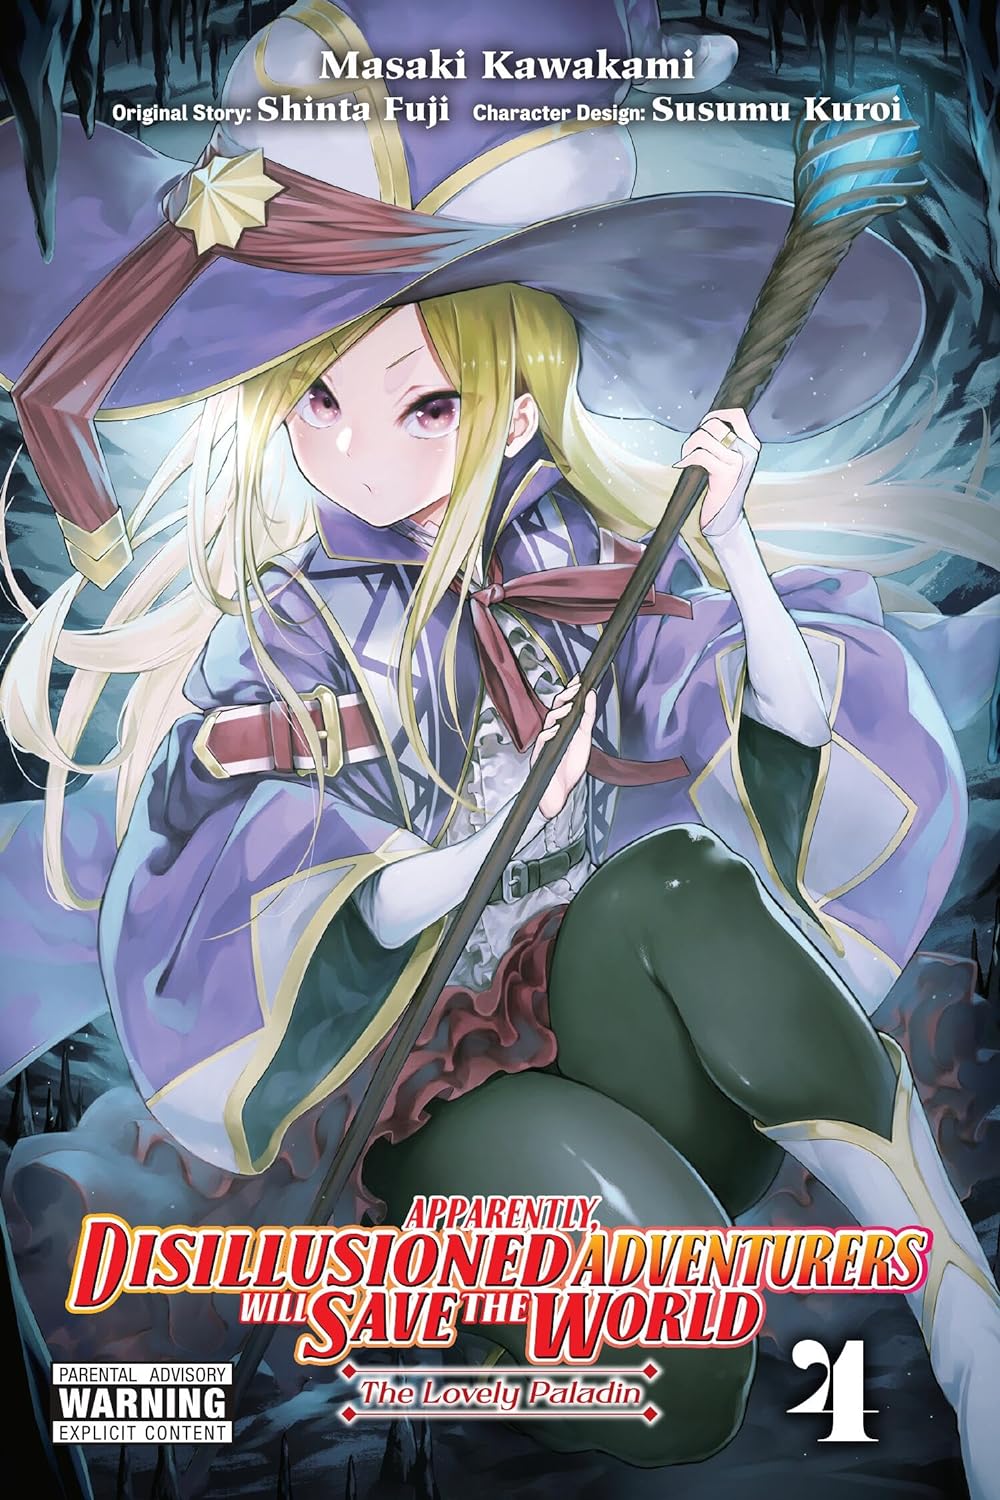 (23/01/2024) Apparently, Disillusioned Adventurers Will Save the World (Manga) Vol. 04